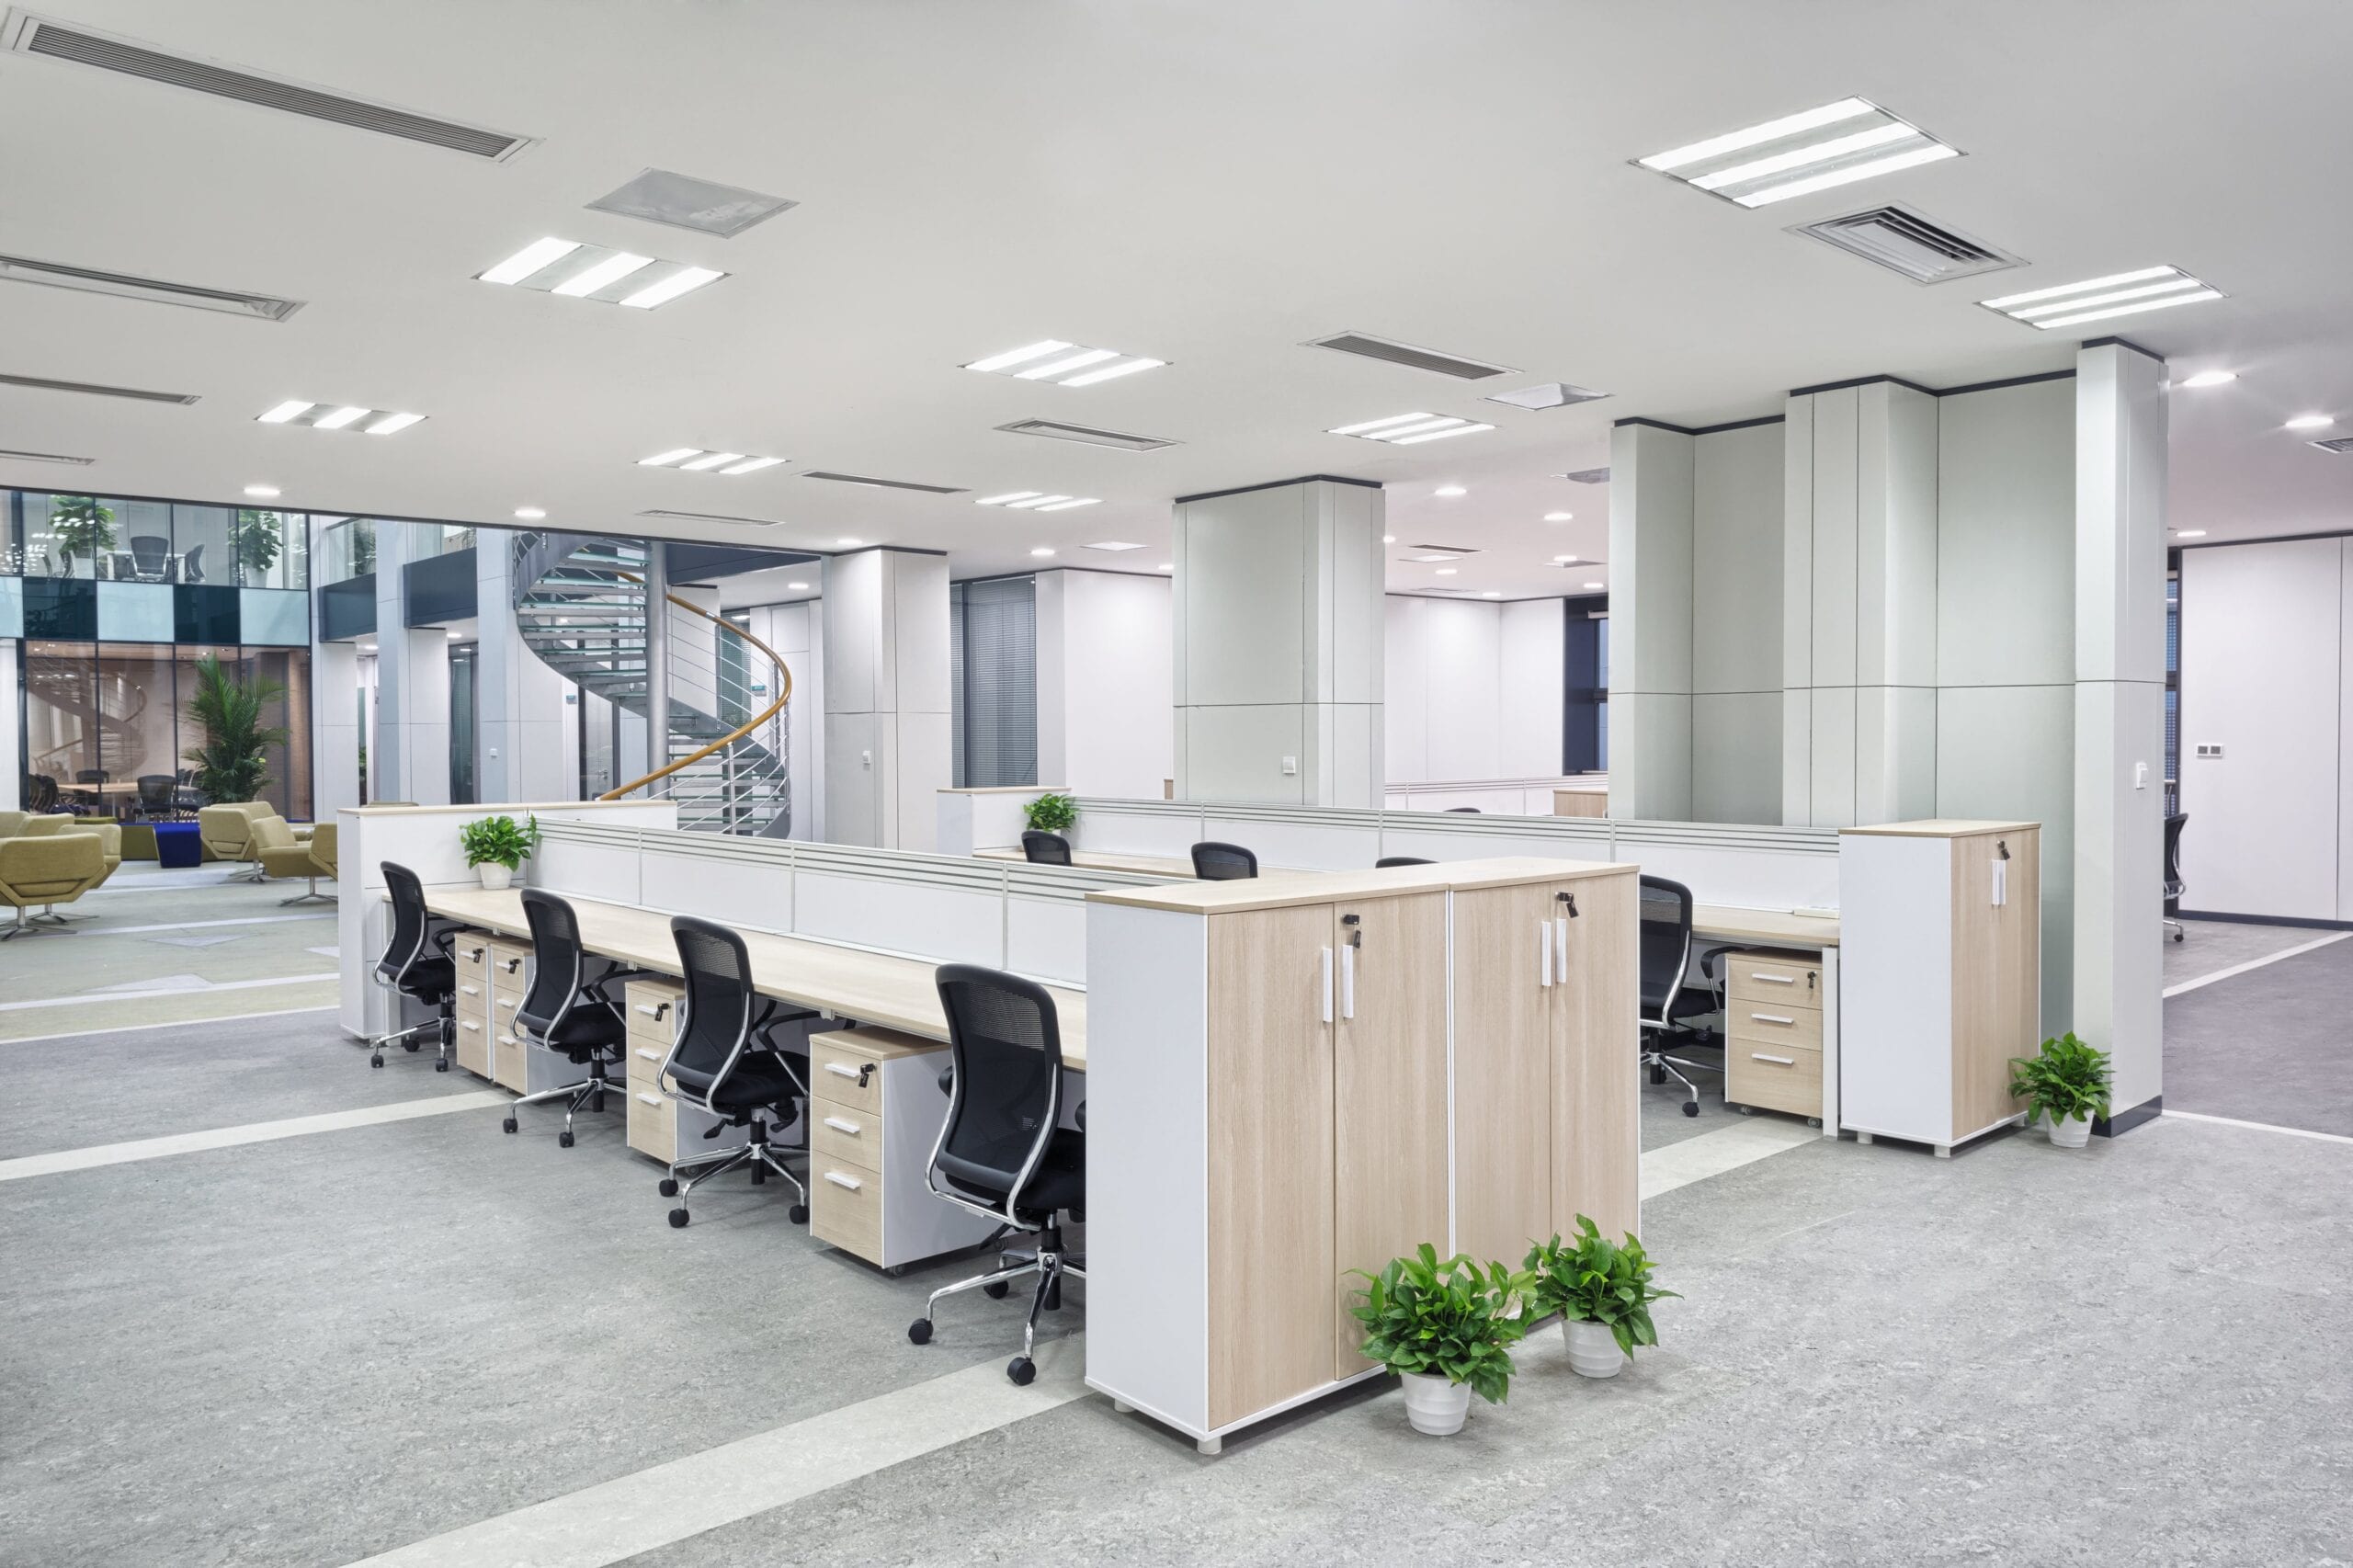 How has COVID influenced the office refurbishment and fit out sector?